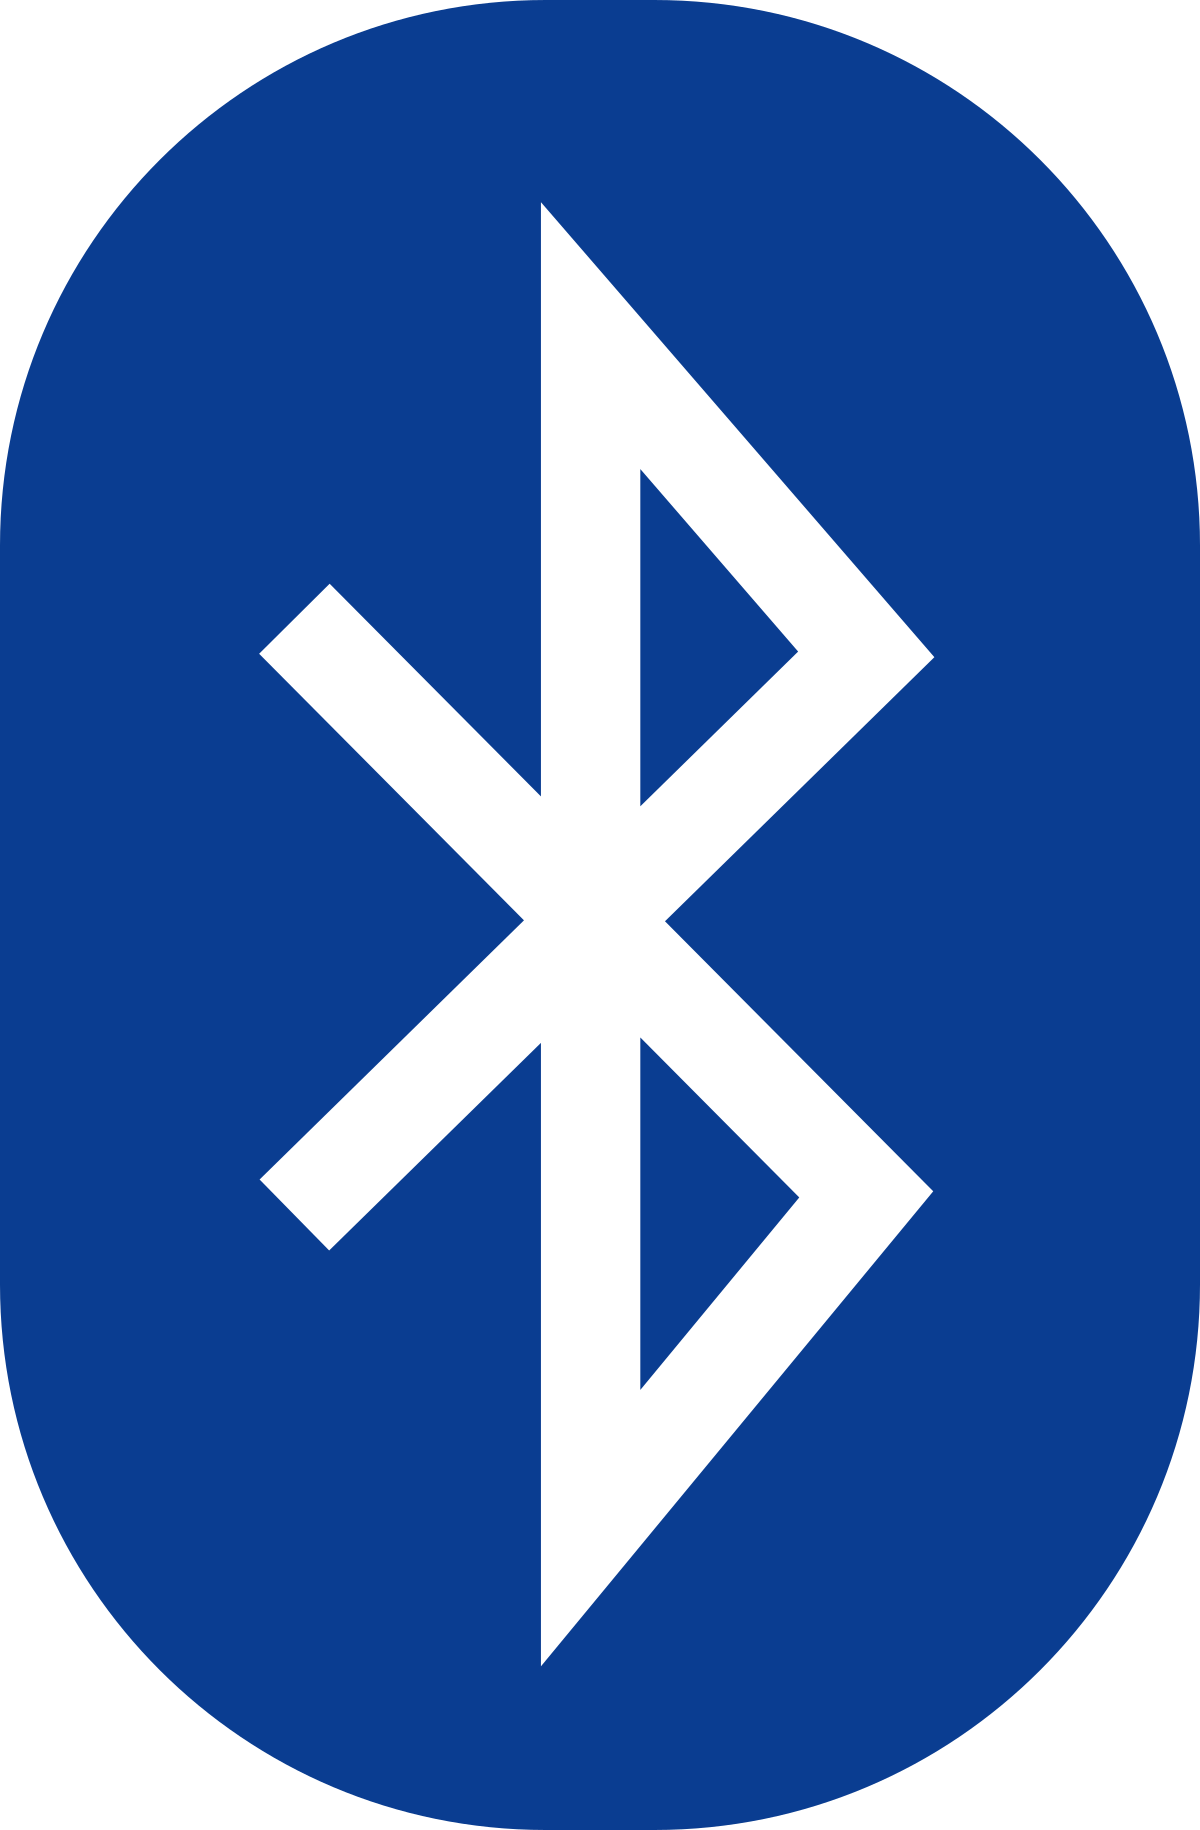 A Bluetooth icon or a computer with a Bluetooth symbol.